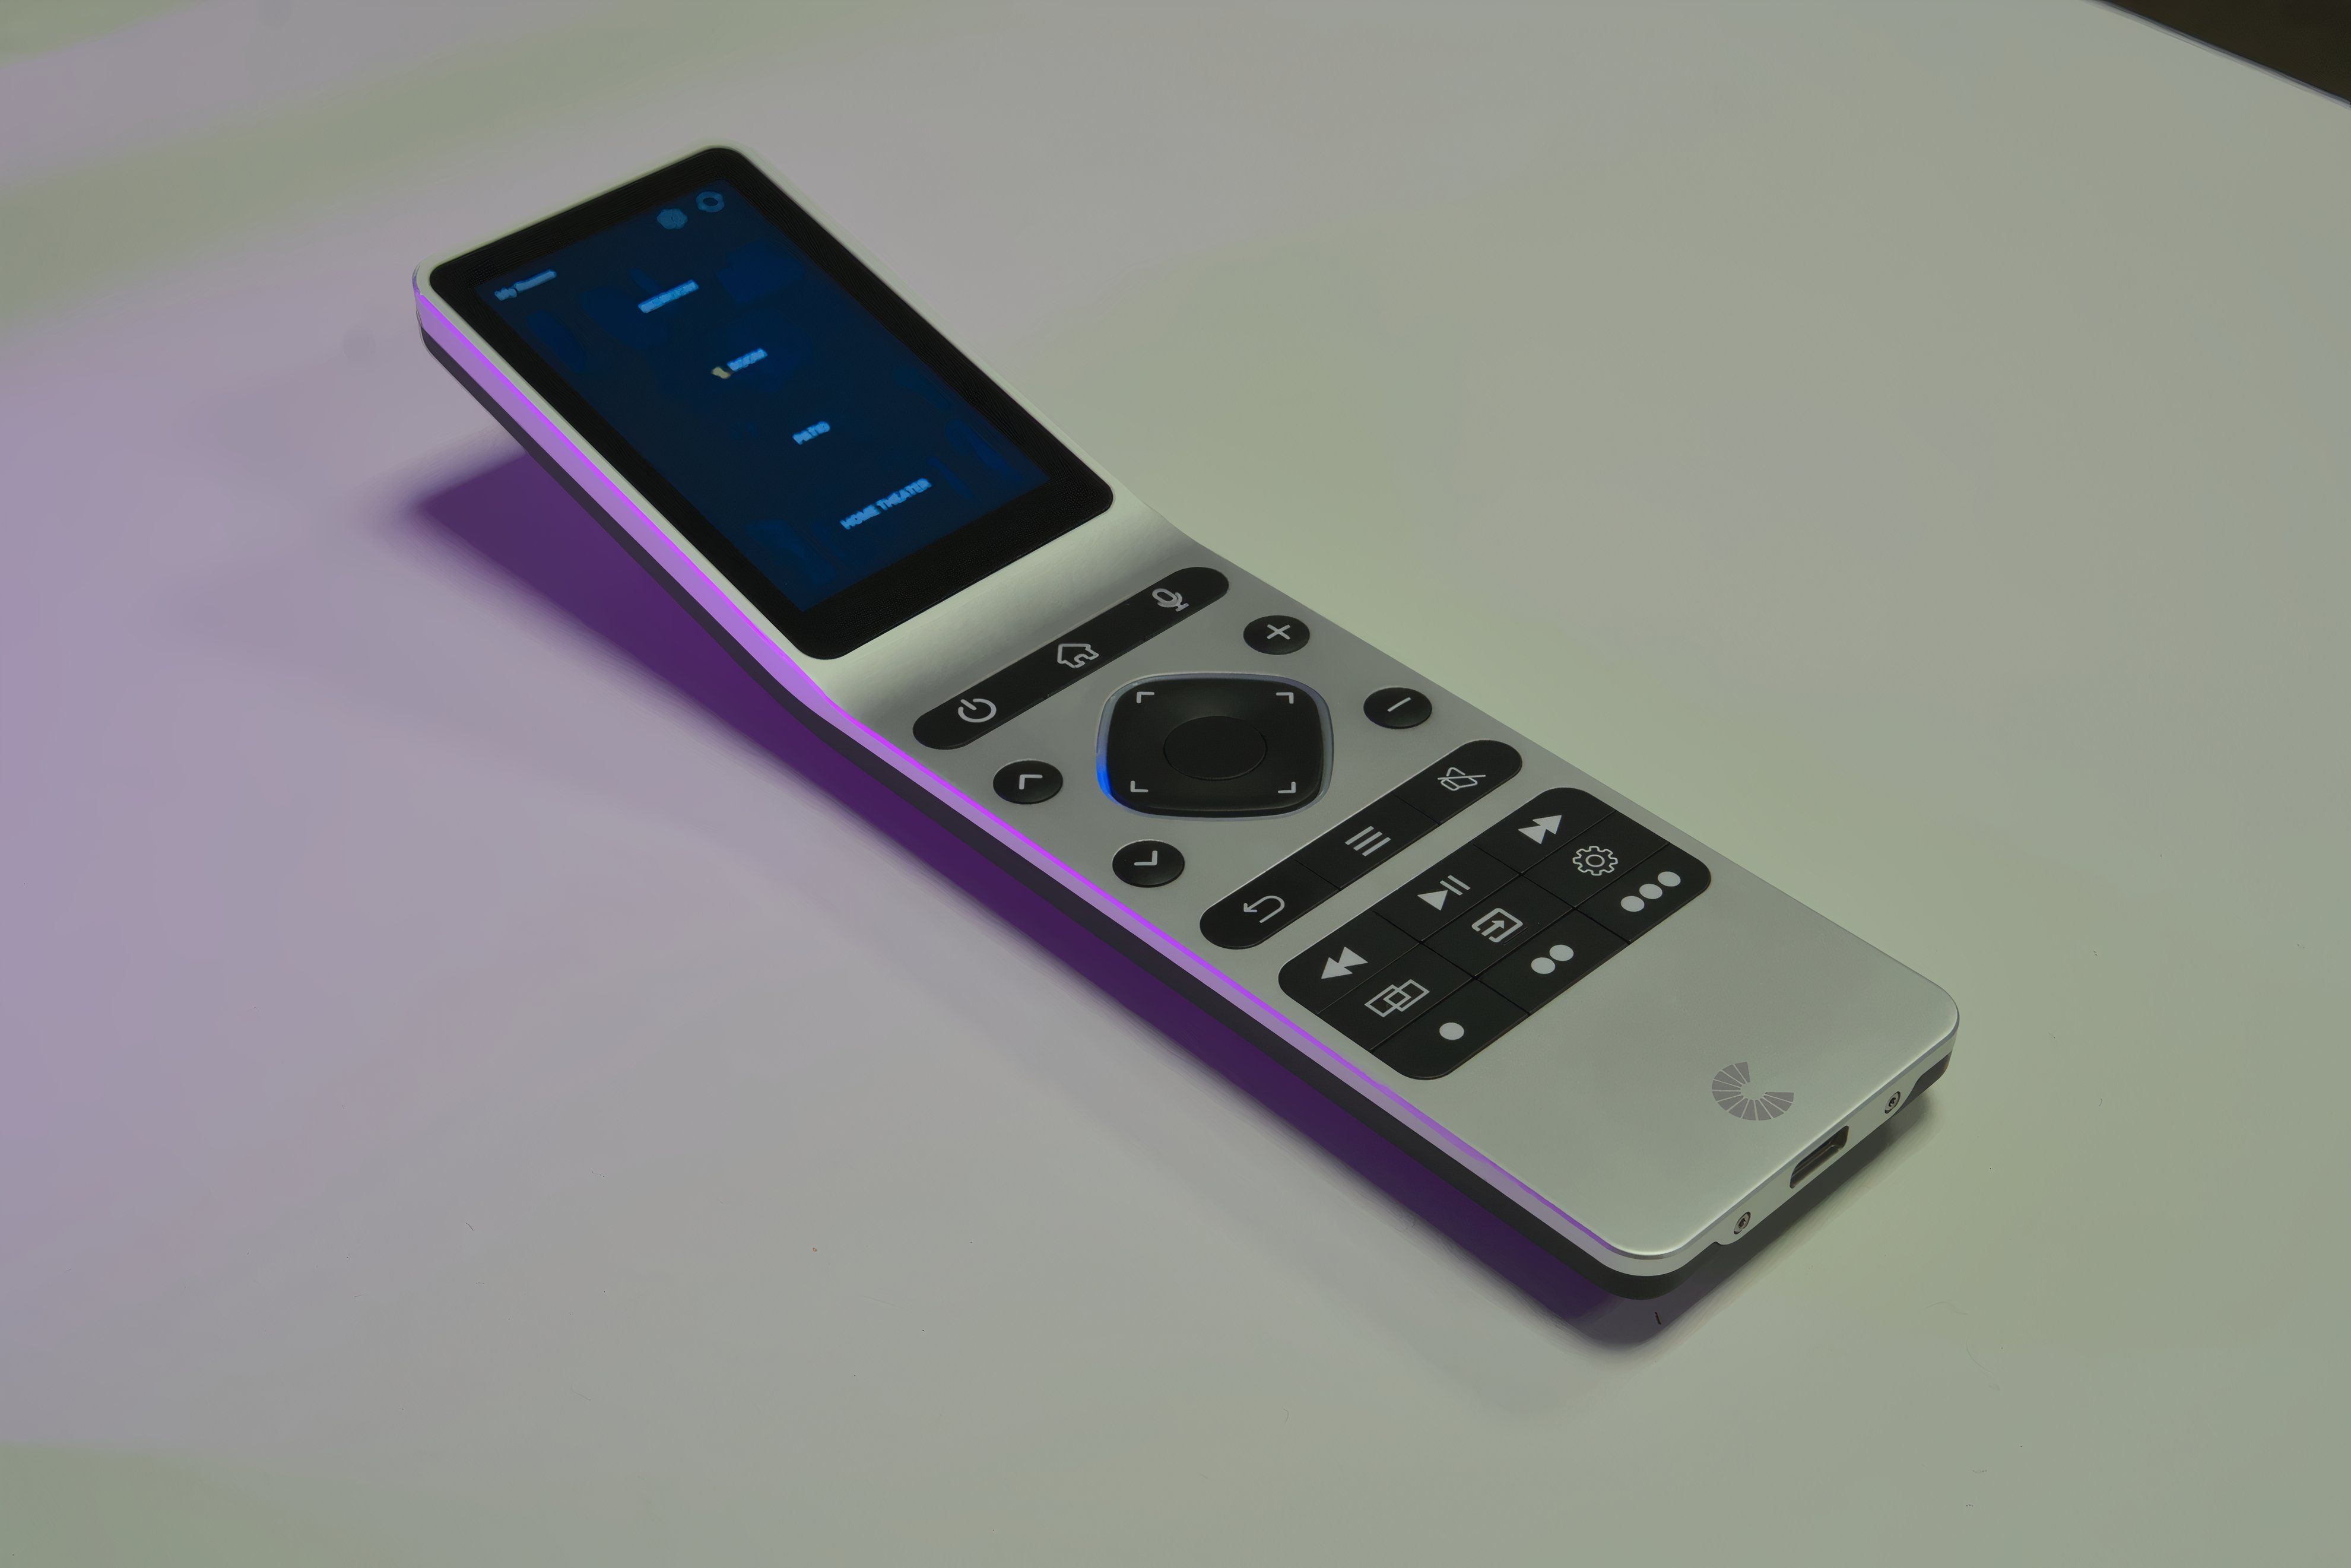 Cantata’s Haptique universal remotes feature intuitive touchscreens, customizable haptic feedback and robust voice control capabilities.